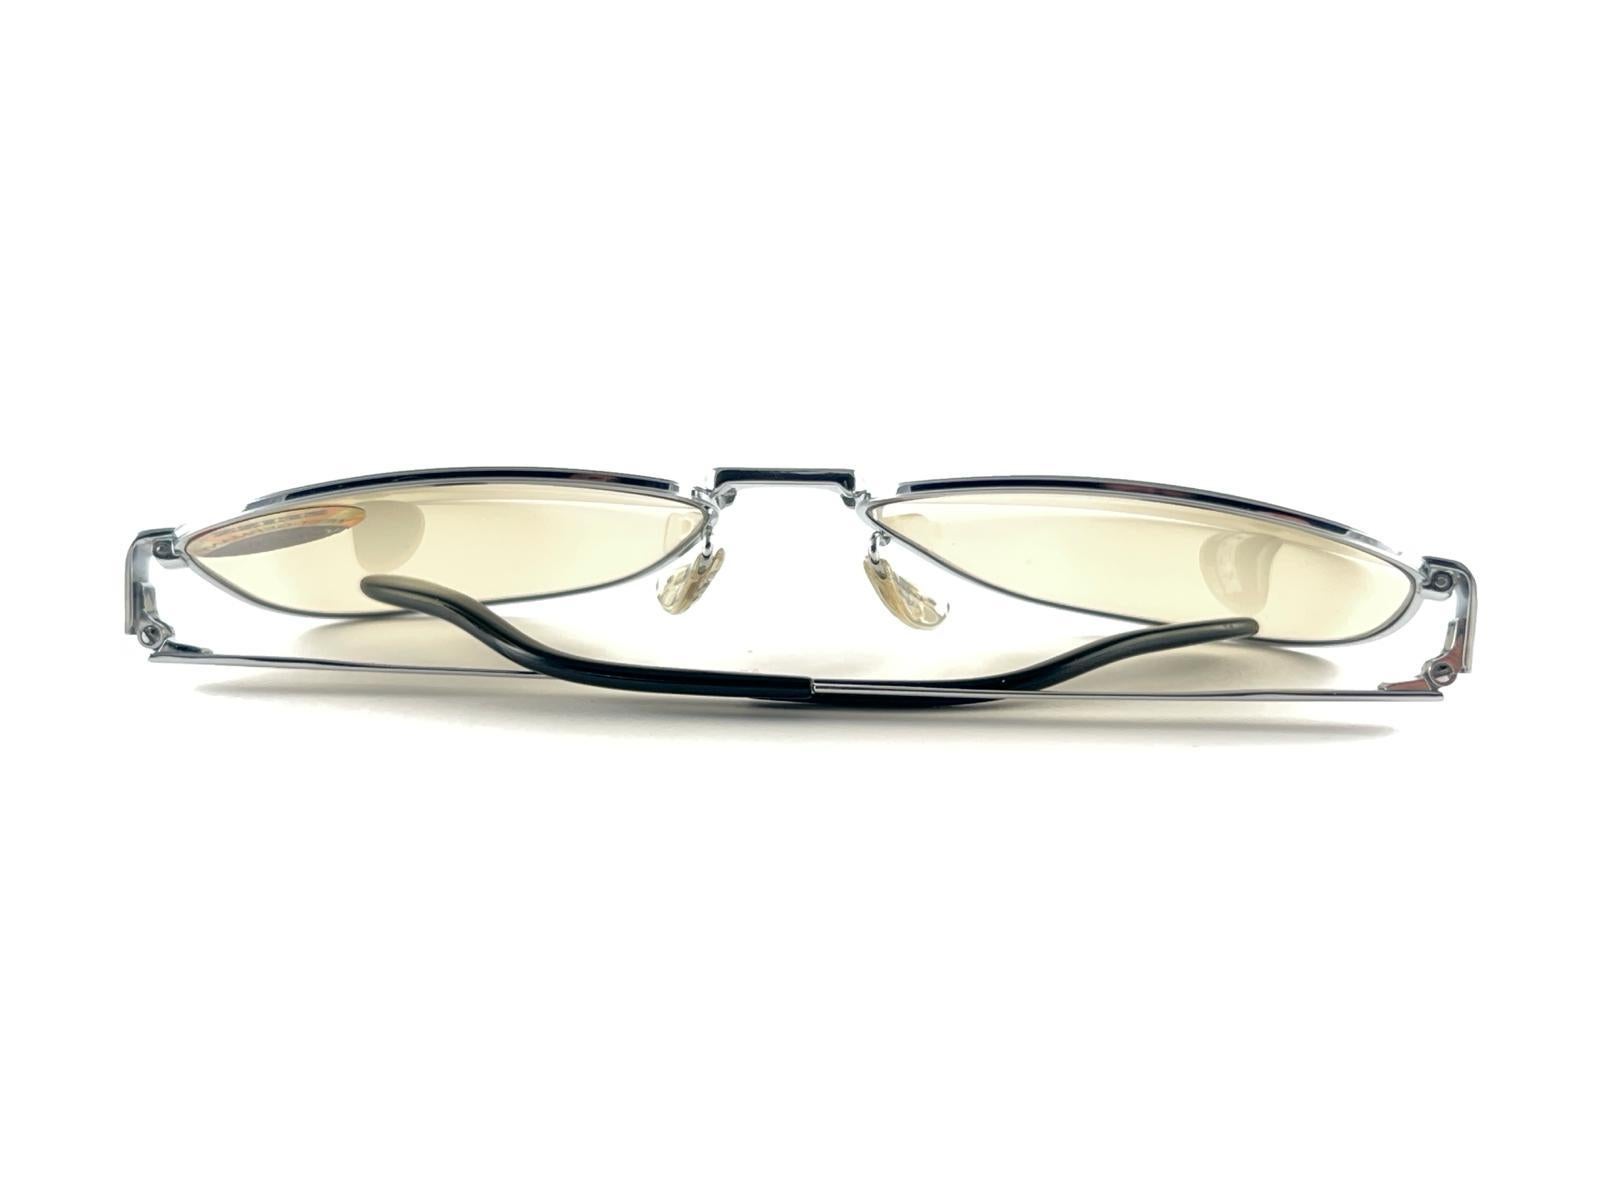 New Vintage Zeiss 9047 Silver Oversized Sunglasses Made in West Germany For Sale 4